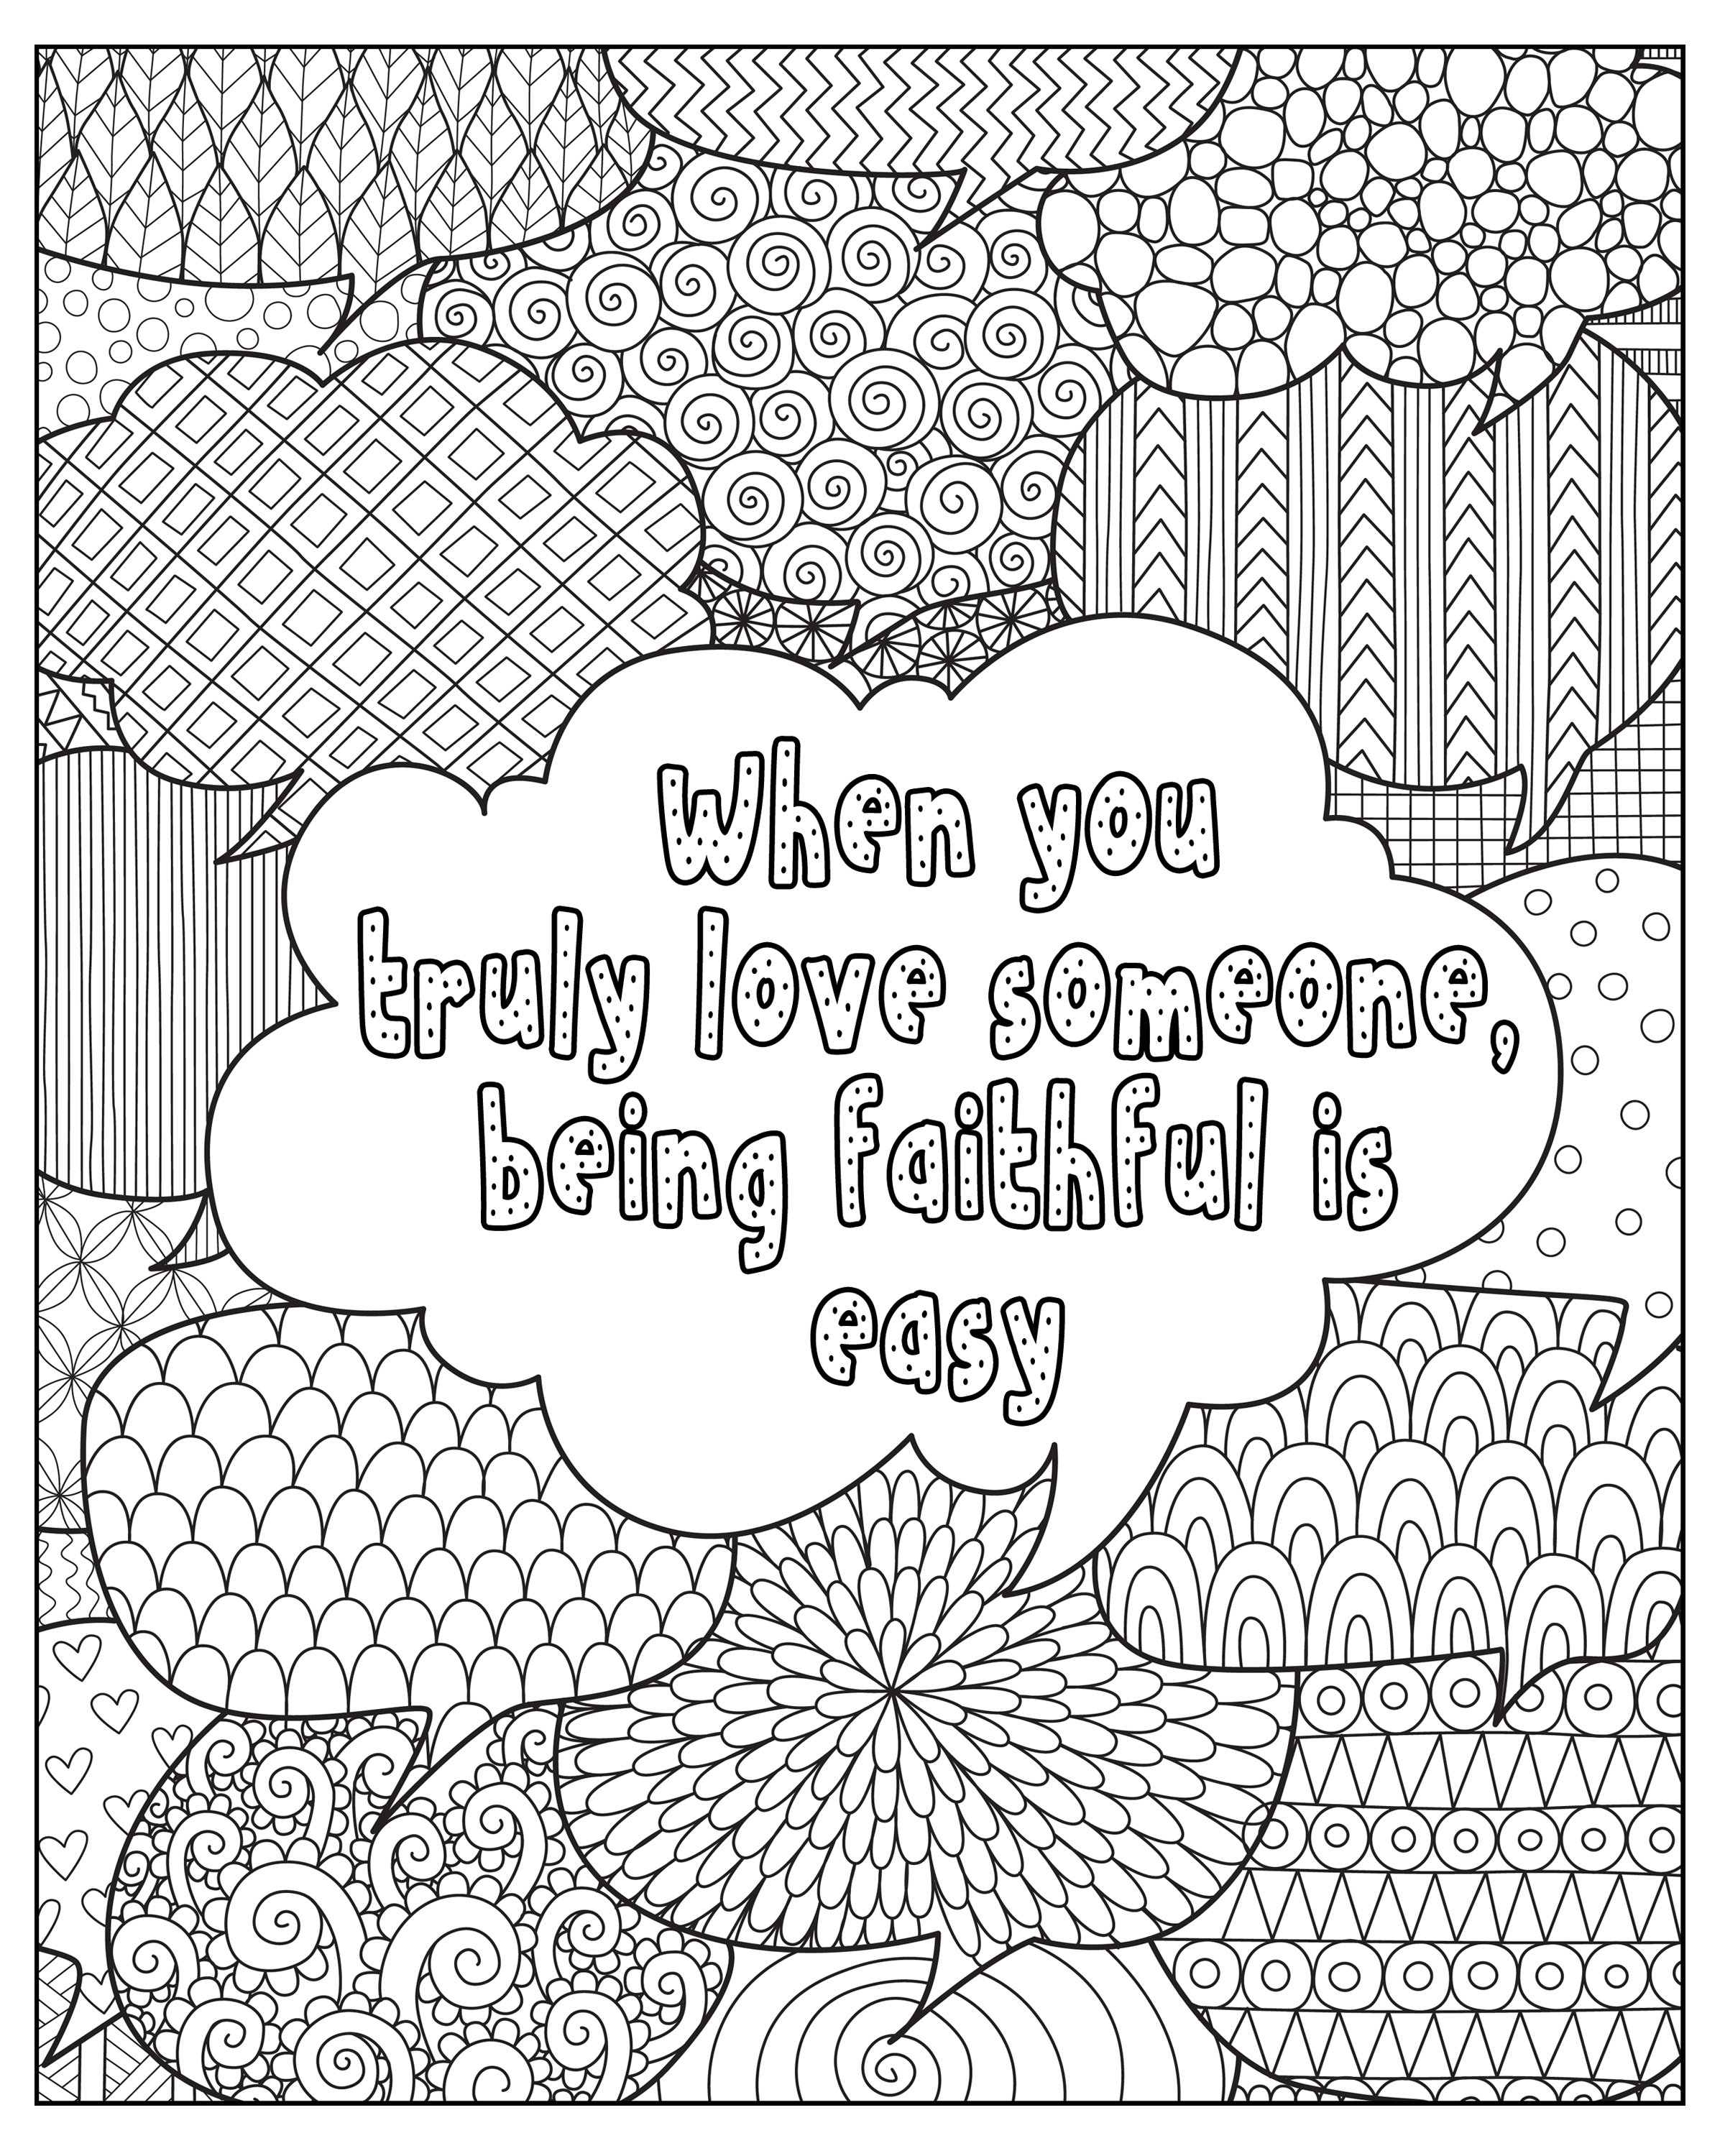 Inspirational Motivational Quotes Coloring Page Bundle for | Etsy